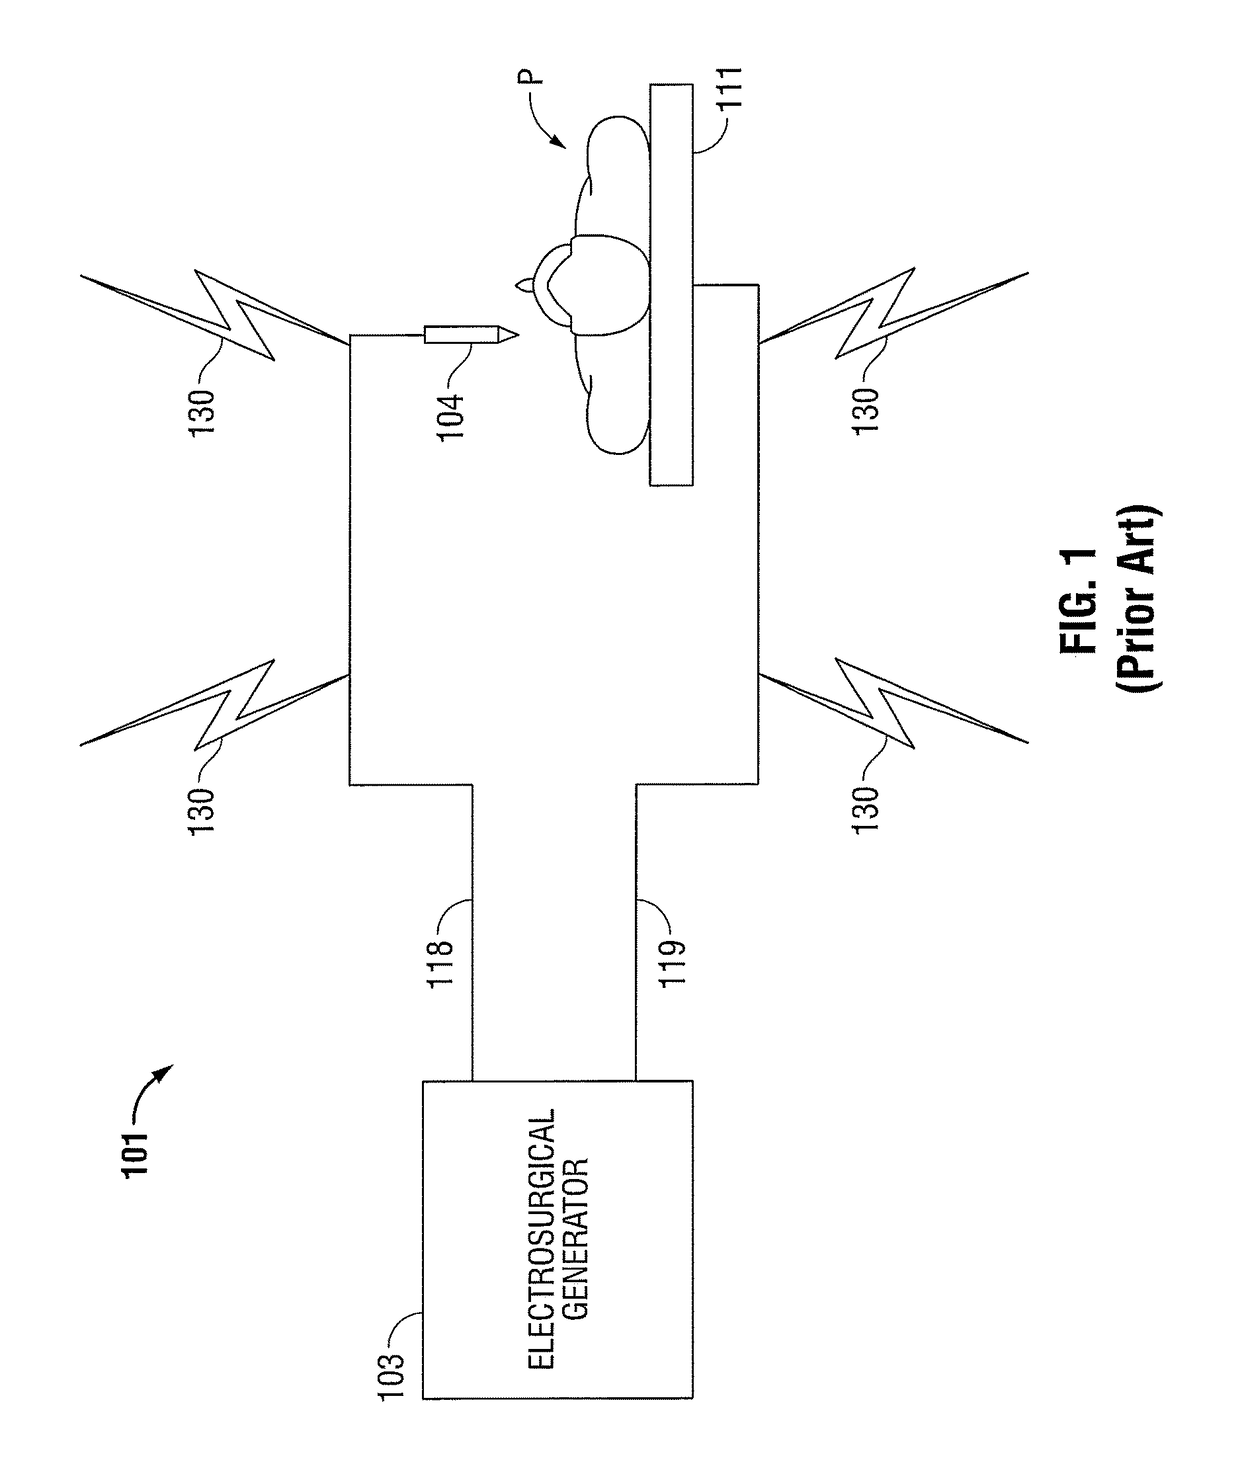 Electrosurgical apparatus with integrated energy sensing at tissue site